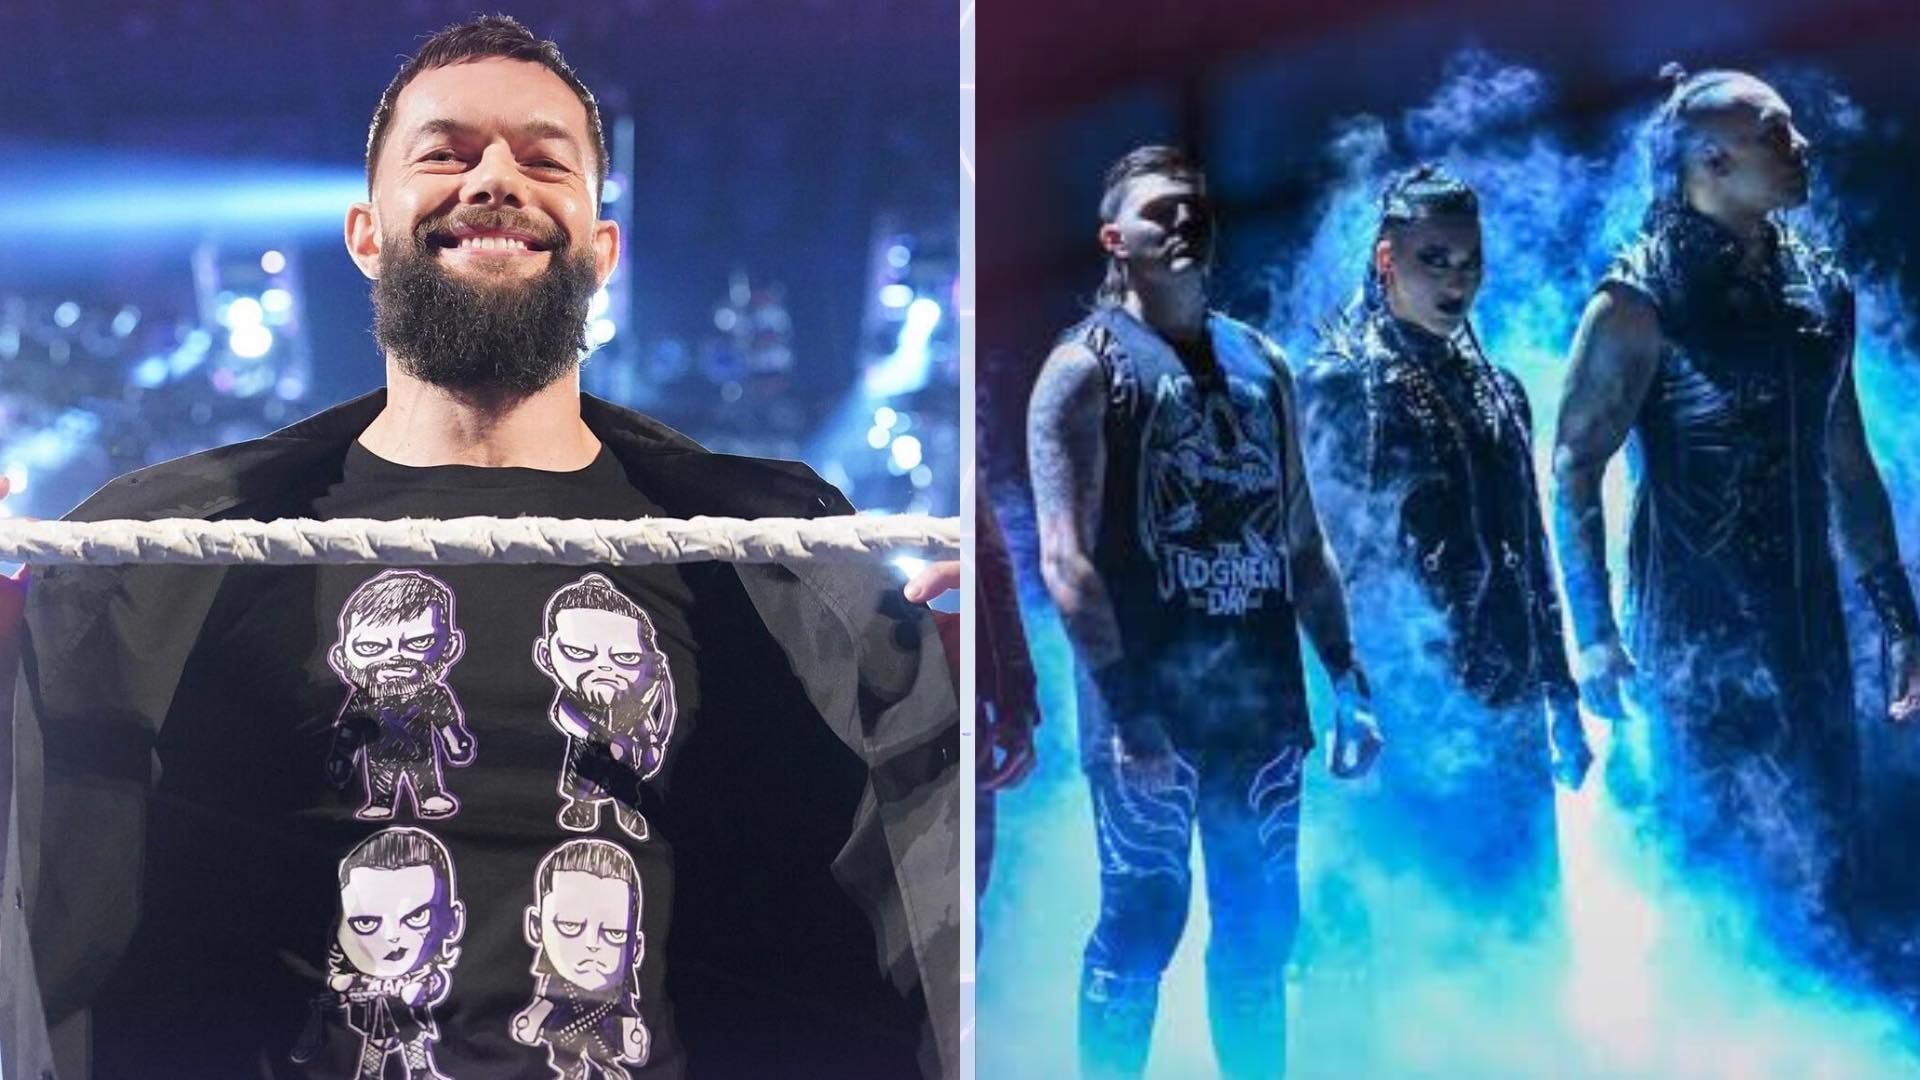 Finn Balor replaced Edge to become part of the Judgment Day